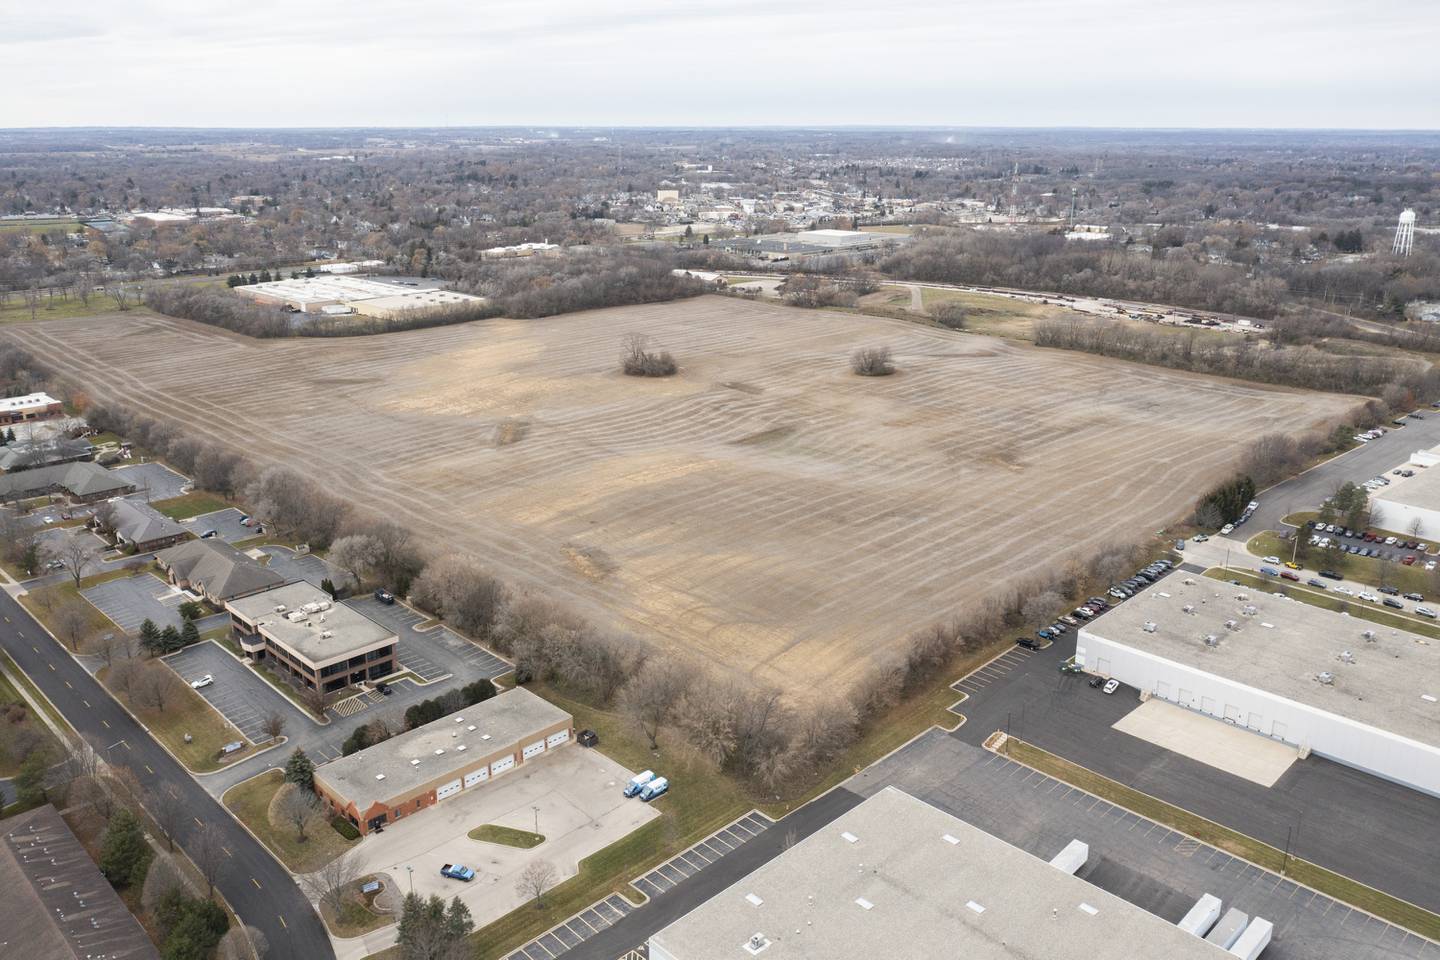 The undeveloped land north of Congress Parkway and east of South Main Street in Crystal Lake photographed on Saturday, December 4, 2021, is the site of a potential Amazon warehouse